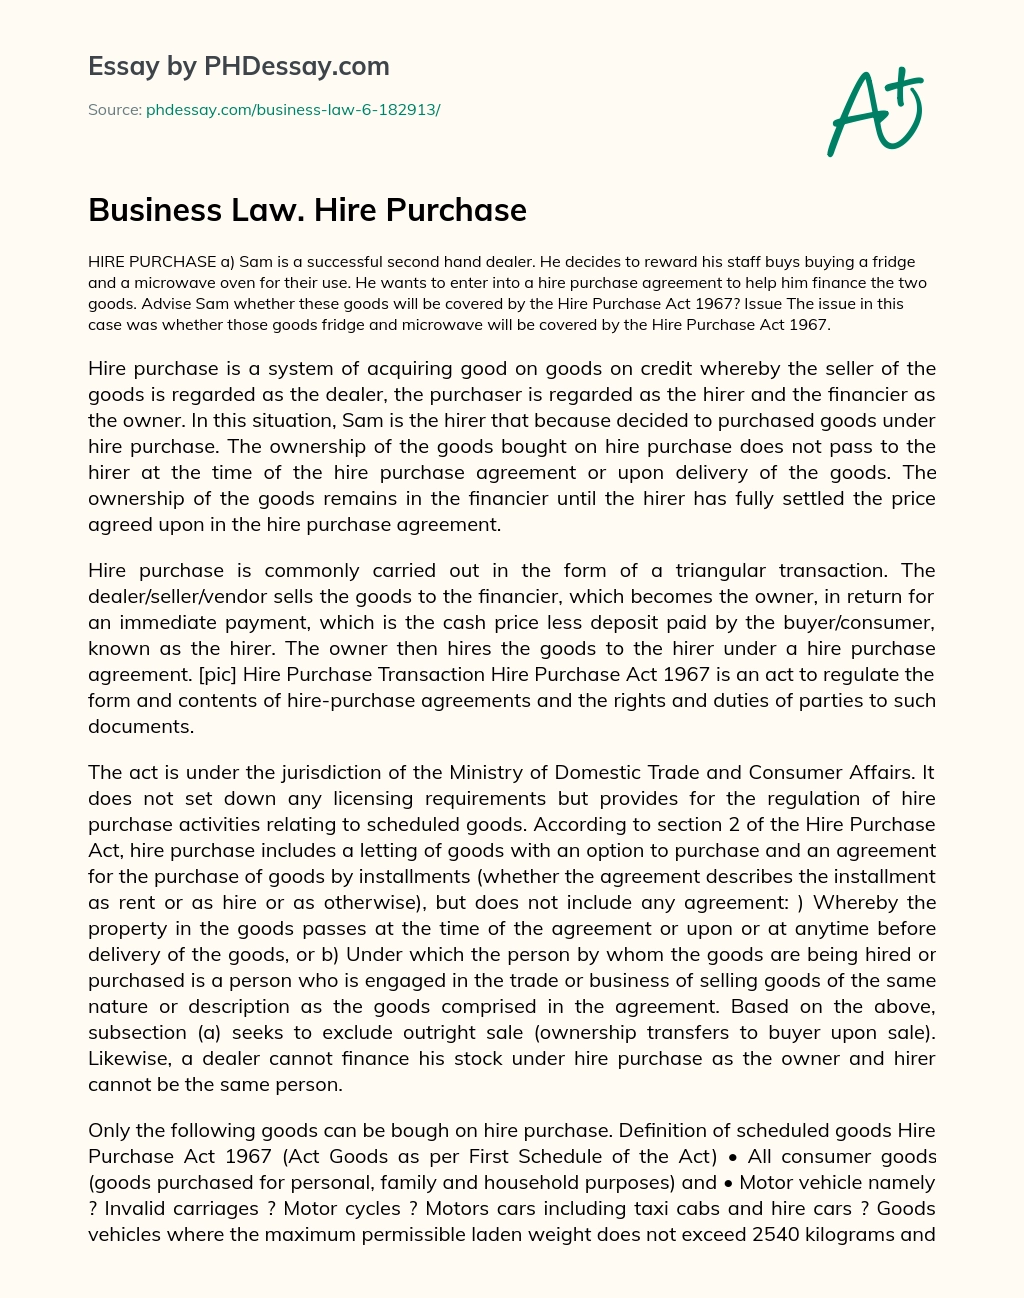 Business Law. Hire Purchase essay